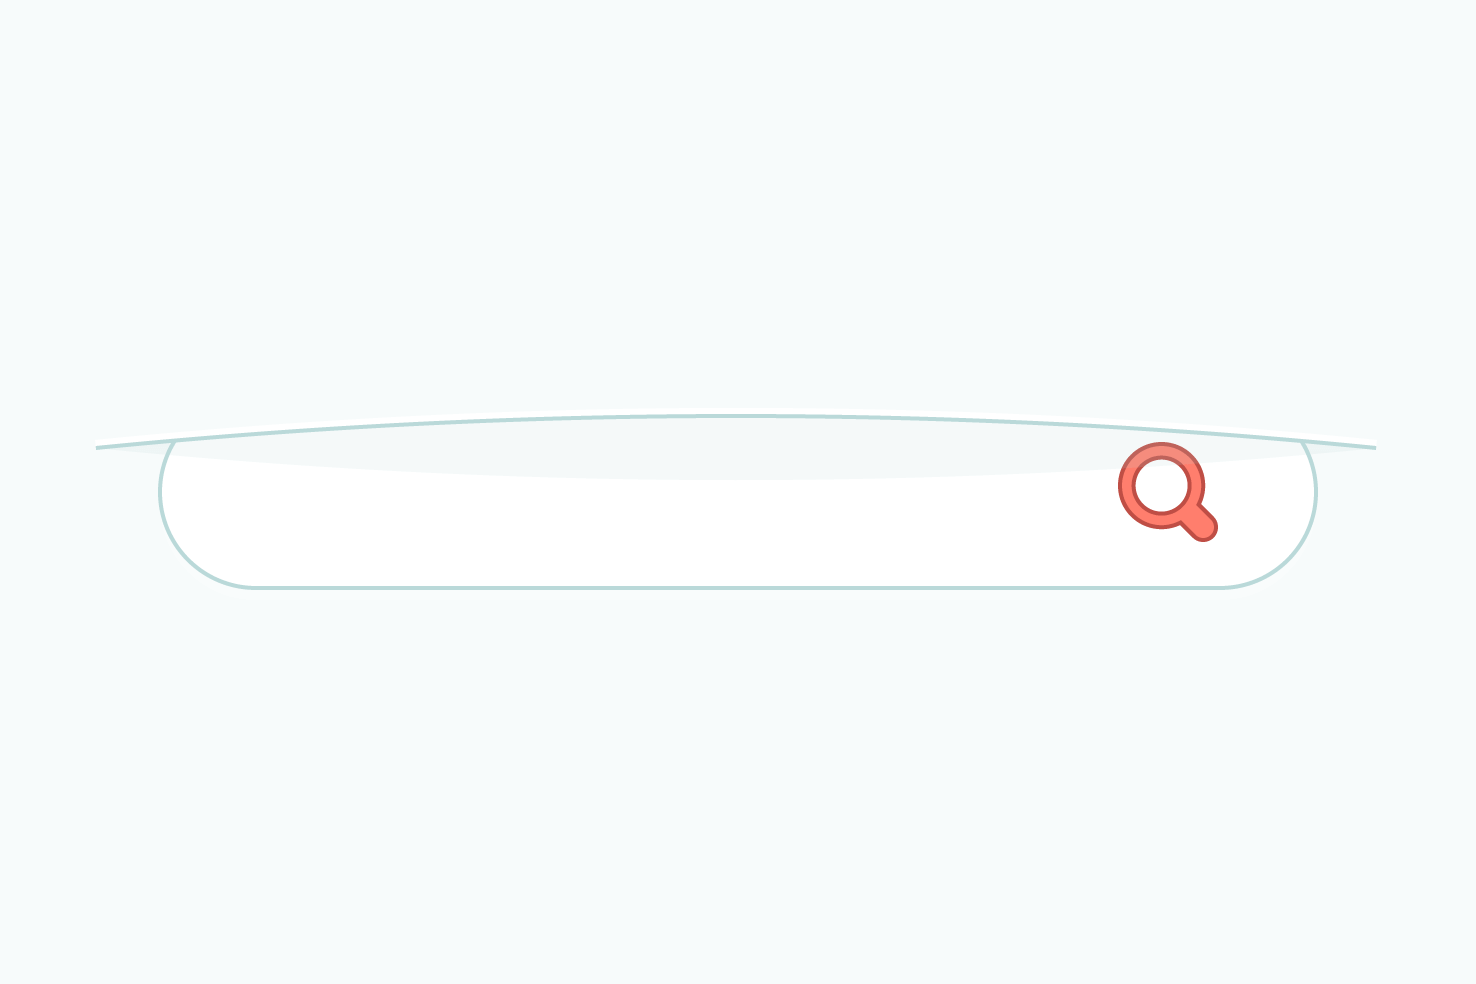 Search overlay with smooth reveal animation